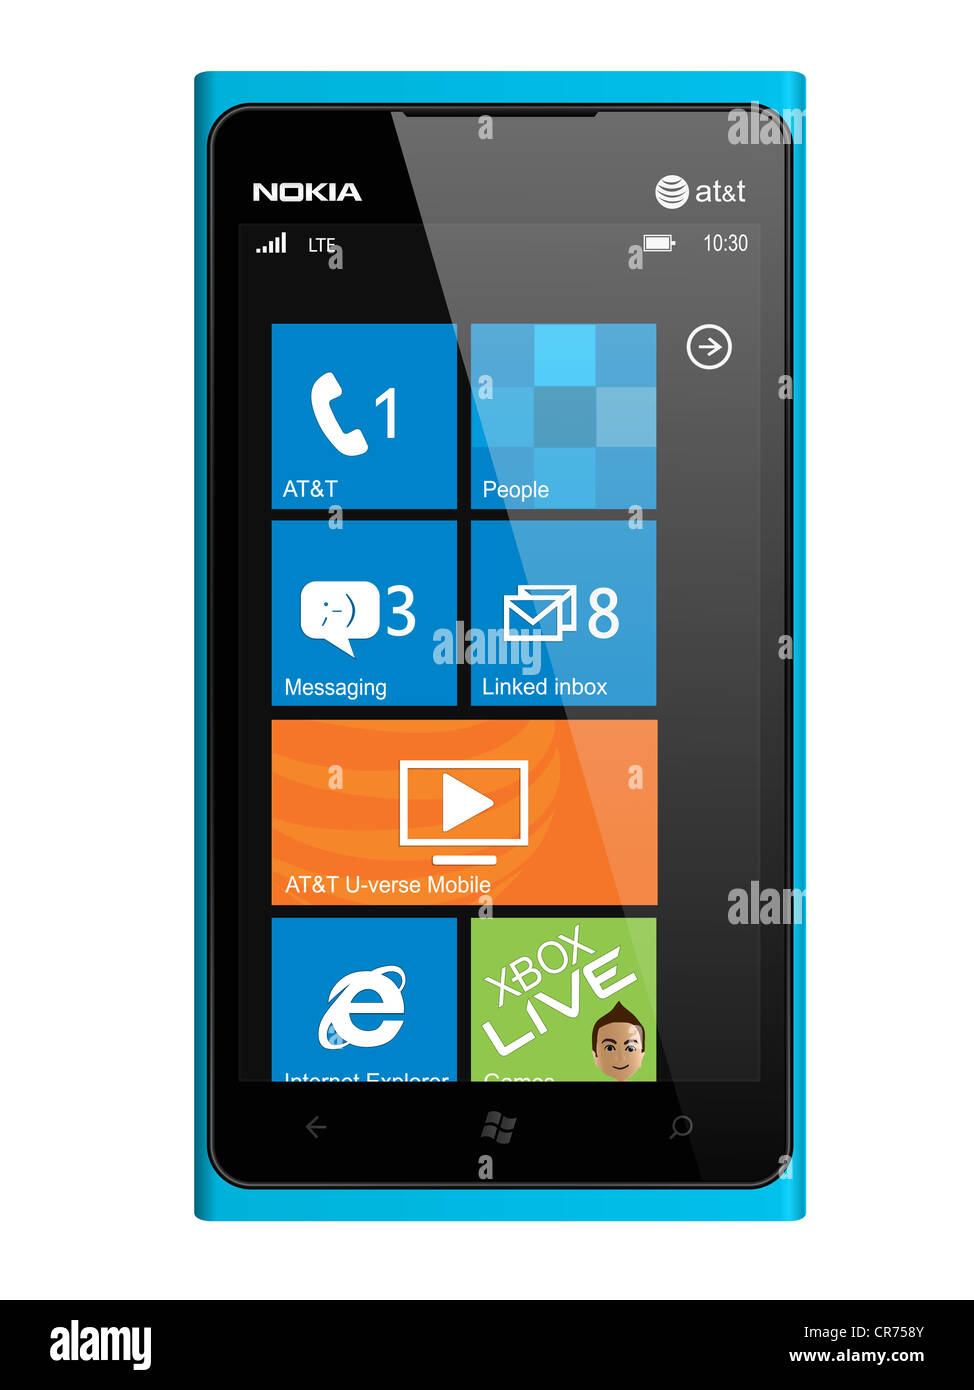 New Nokia smartphone design in blue. Featuring Windows Phone OS, handsets  Lumia 900 Stock Photo - Alamy